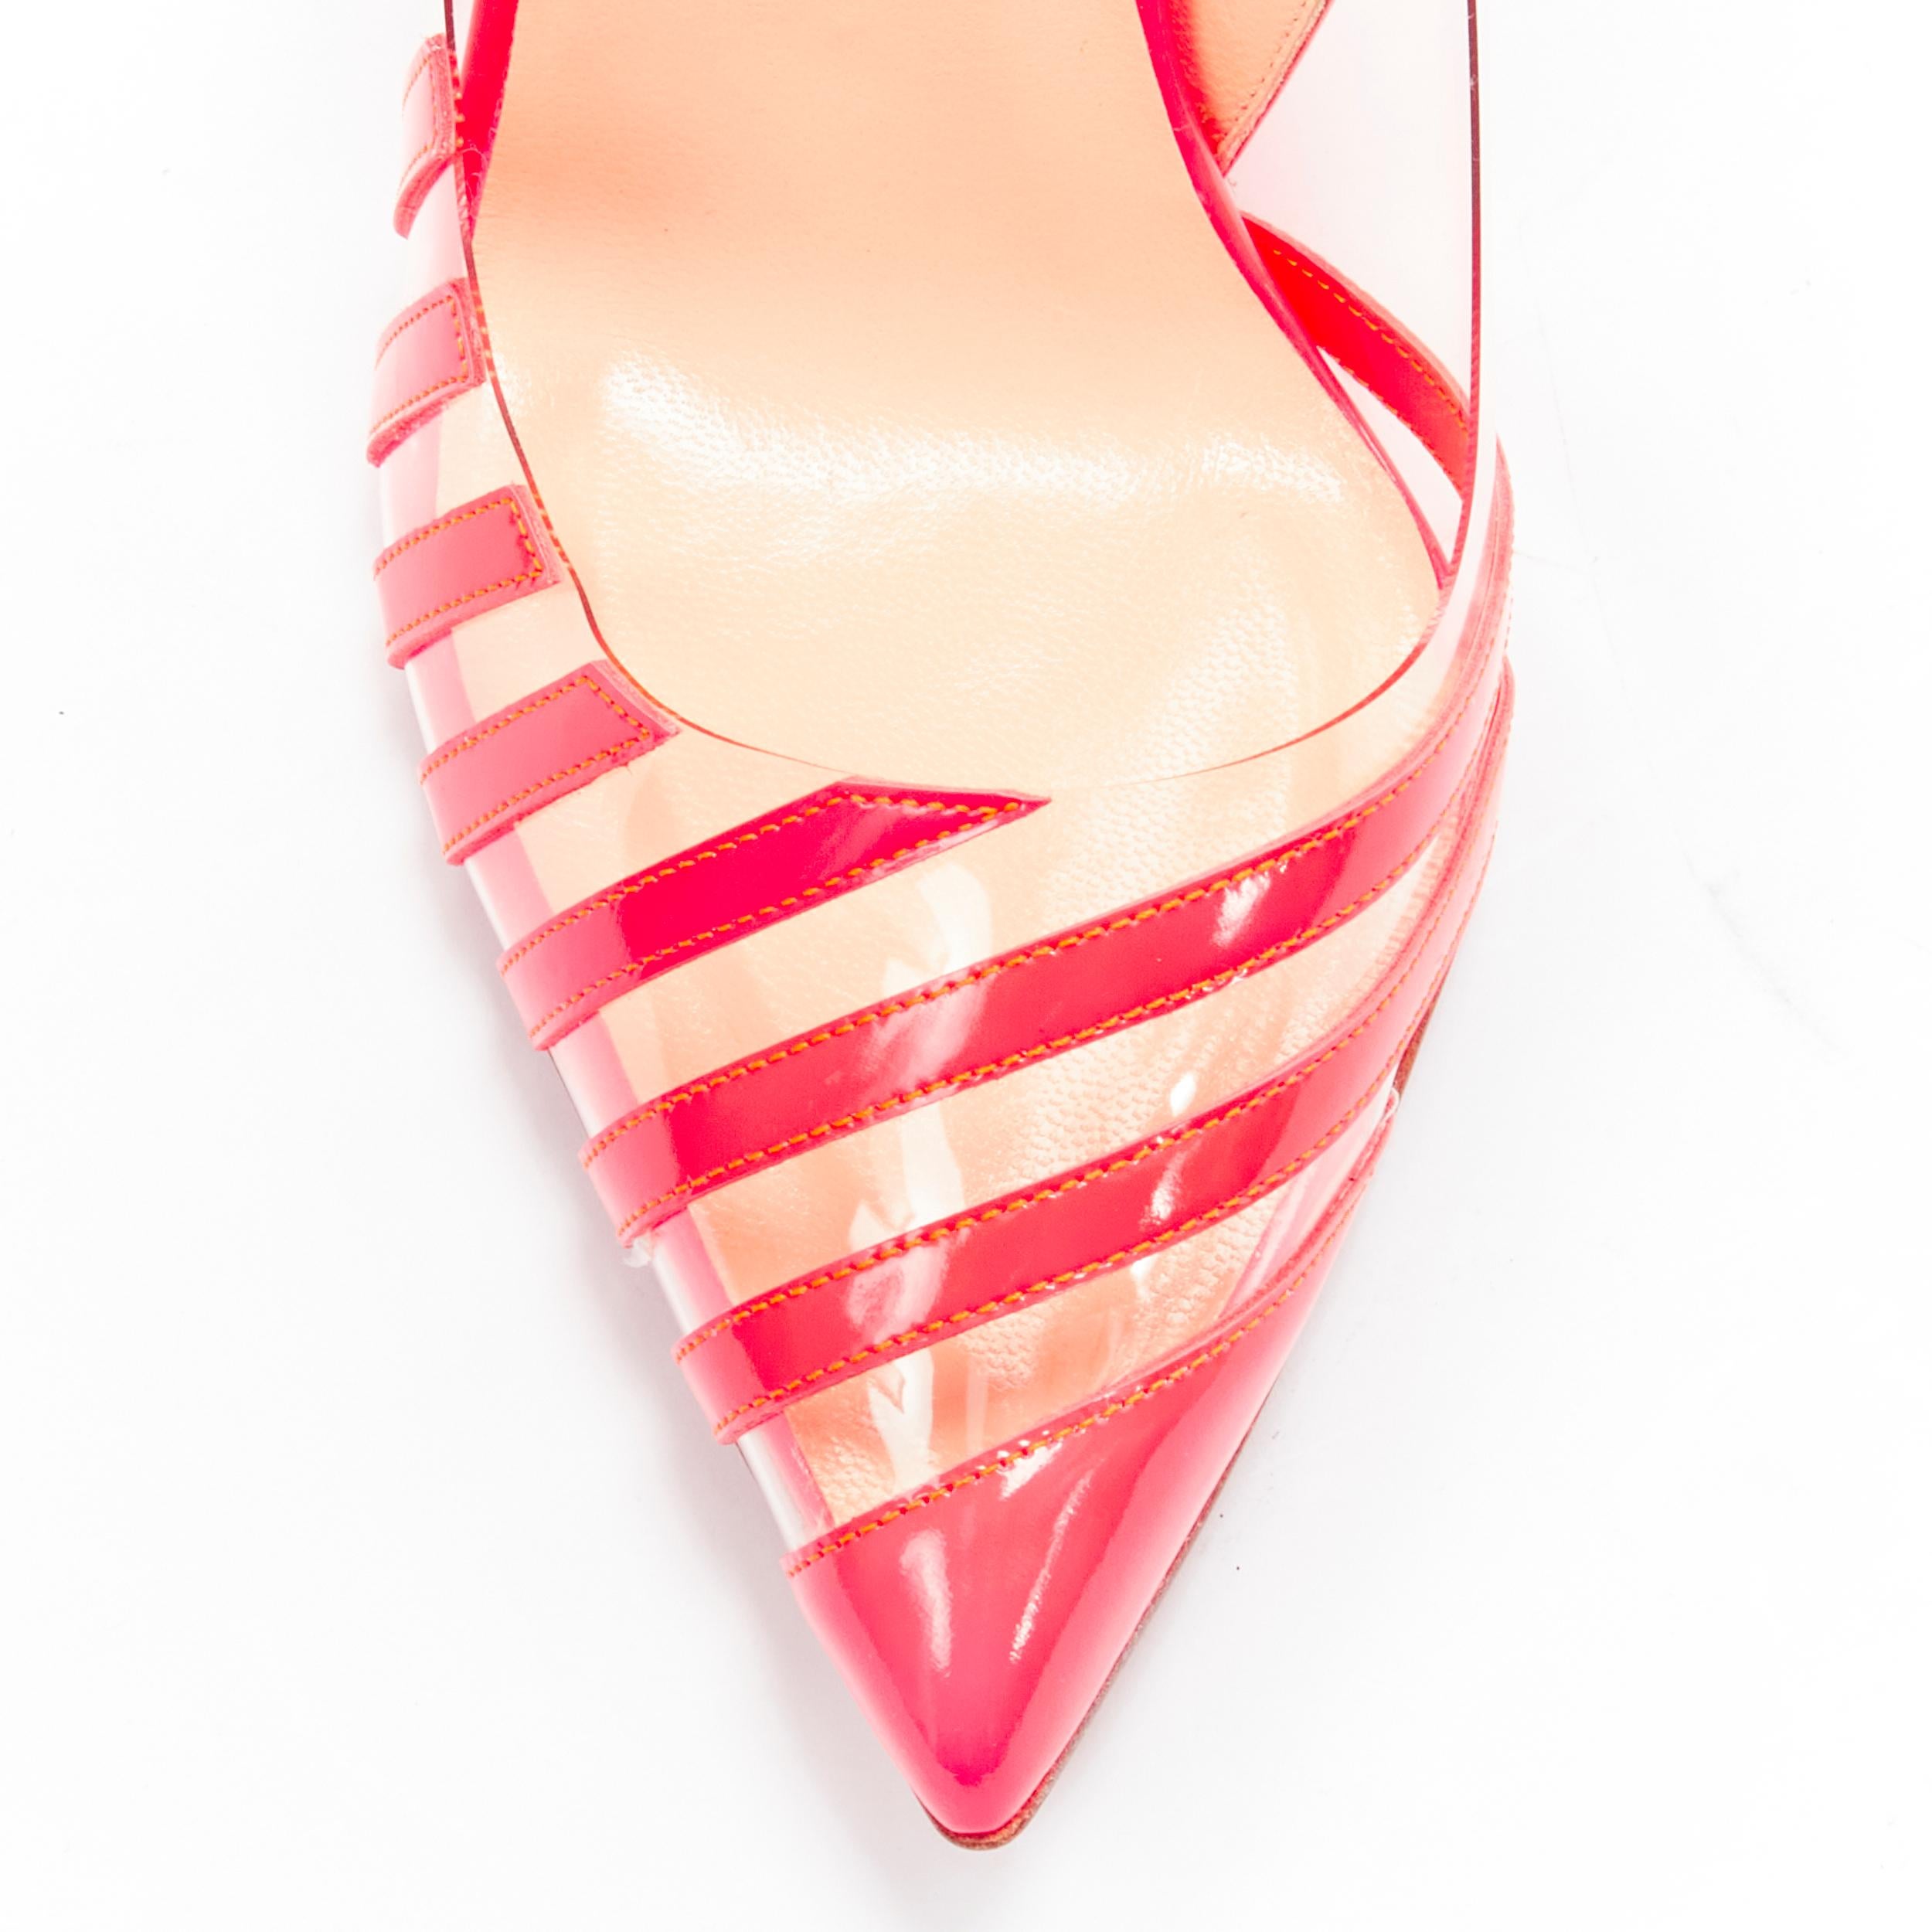 CHRISTIAN LOUBOUTIN Pivichic 100 neon pink striped patent pigalle pump EU37.5 For Sale 1